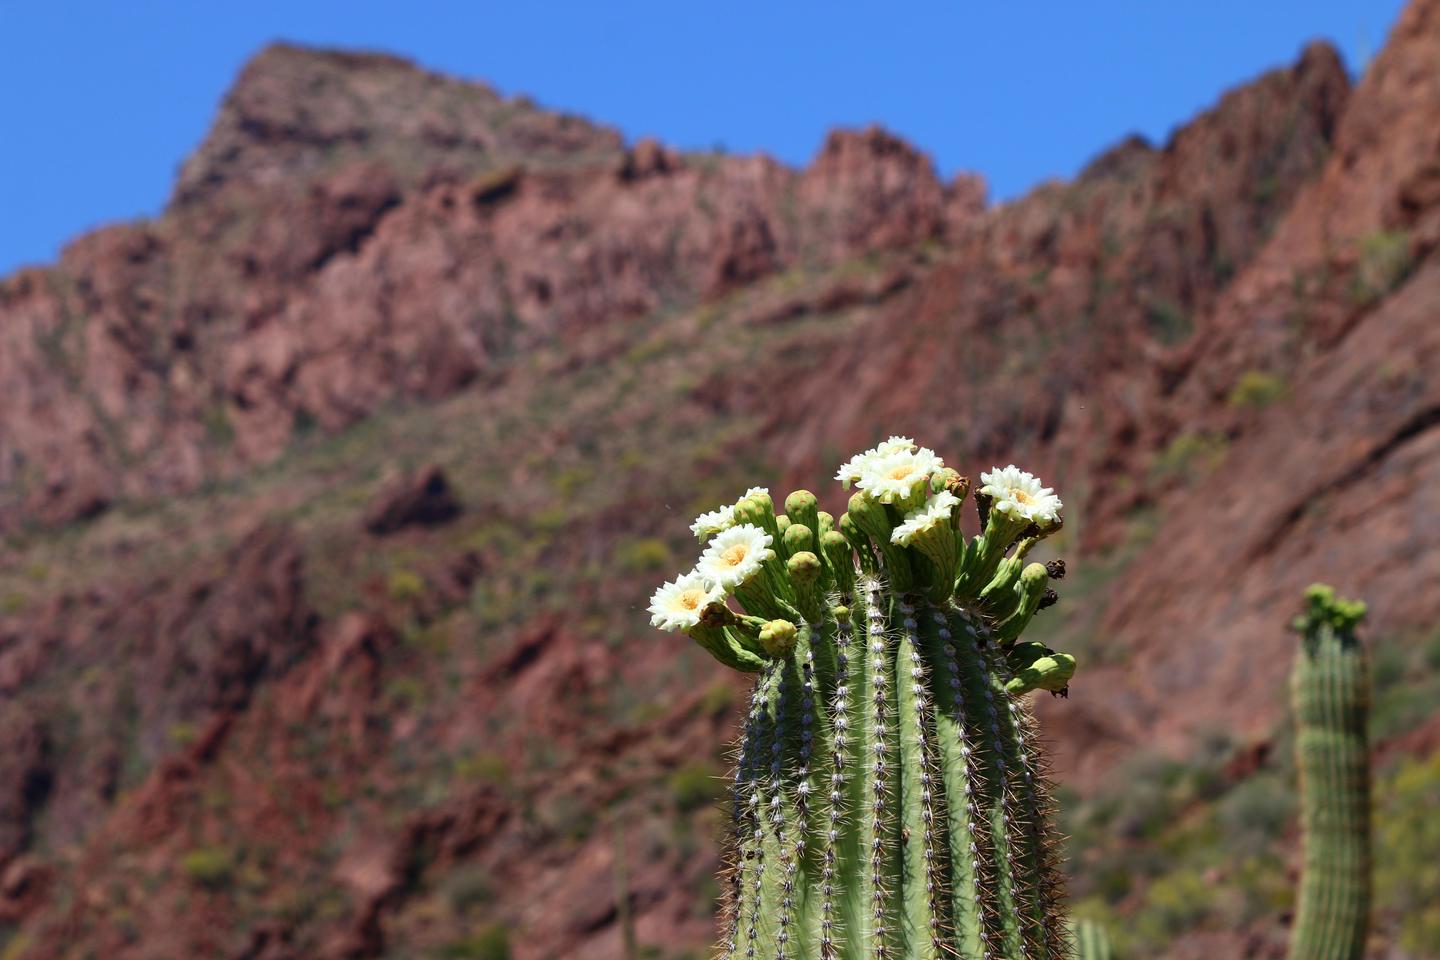 Blooming saguaro cactus with a mountain visible behind it. Experience the rich assemblage of cacti at Organ Pipe Cactus.